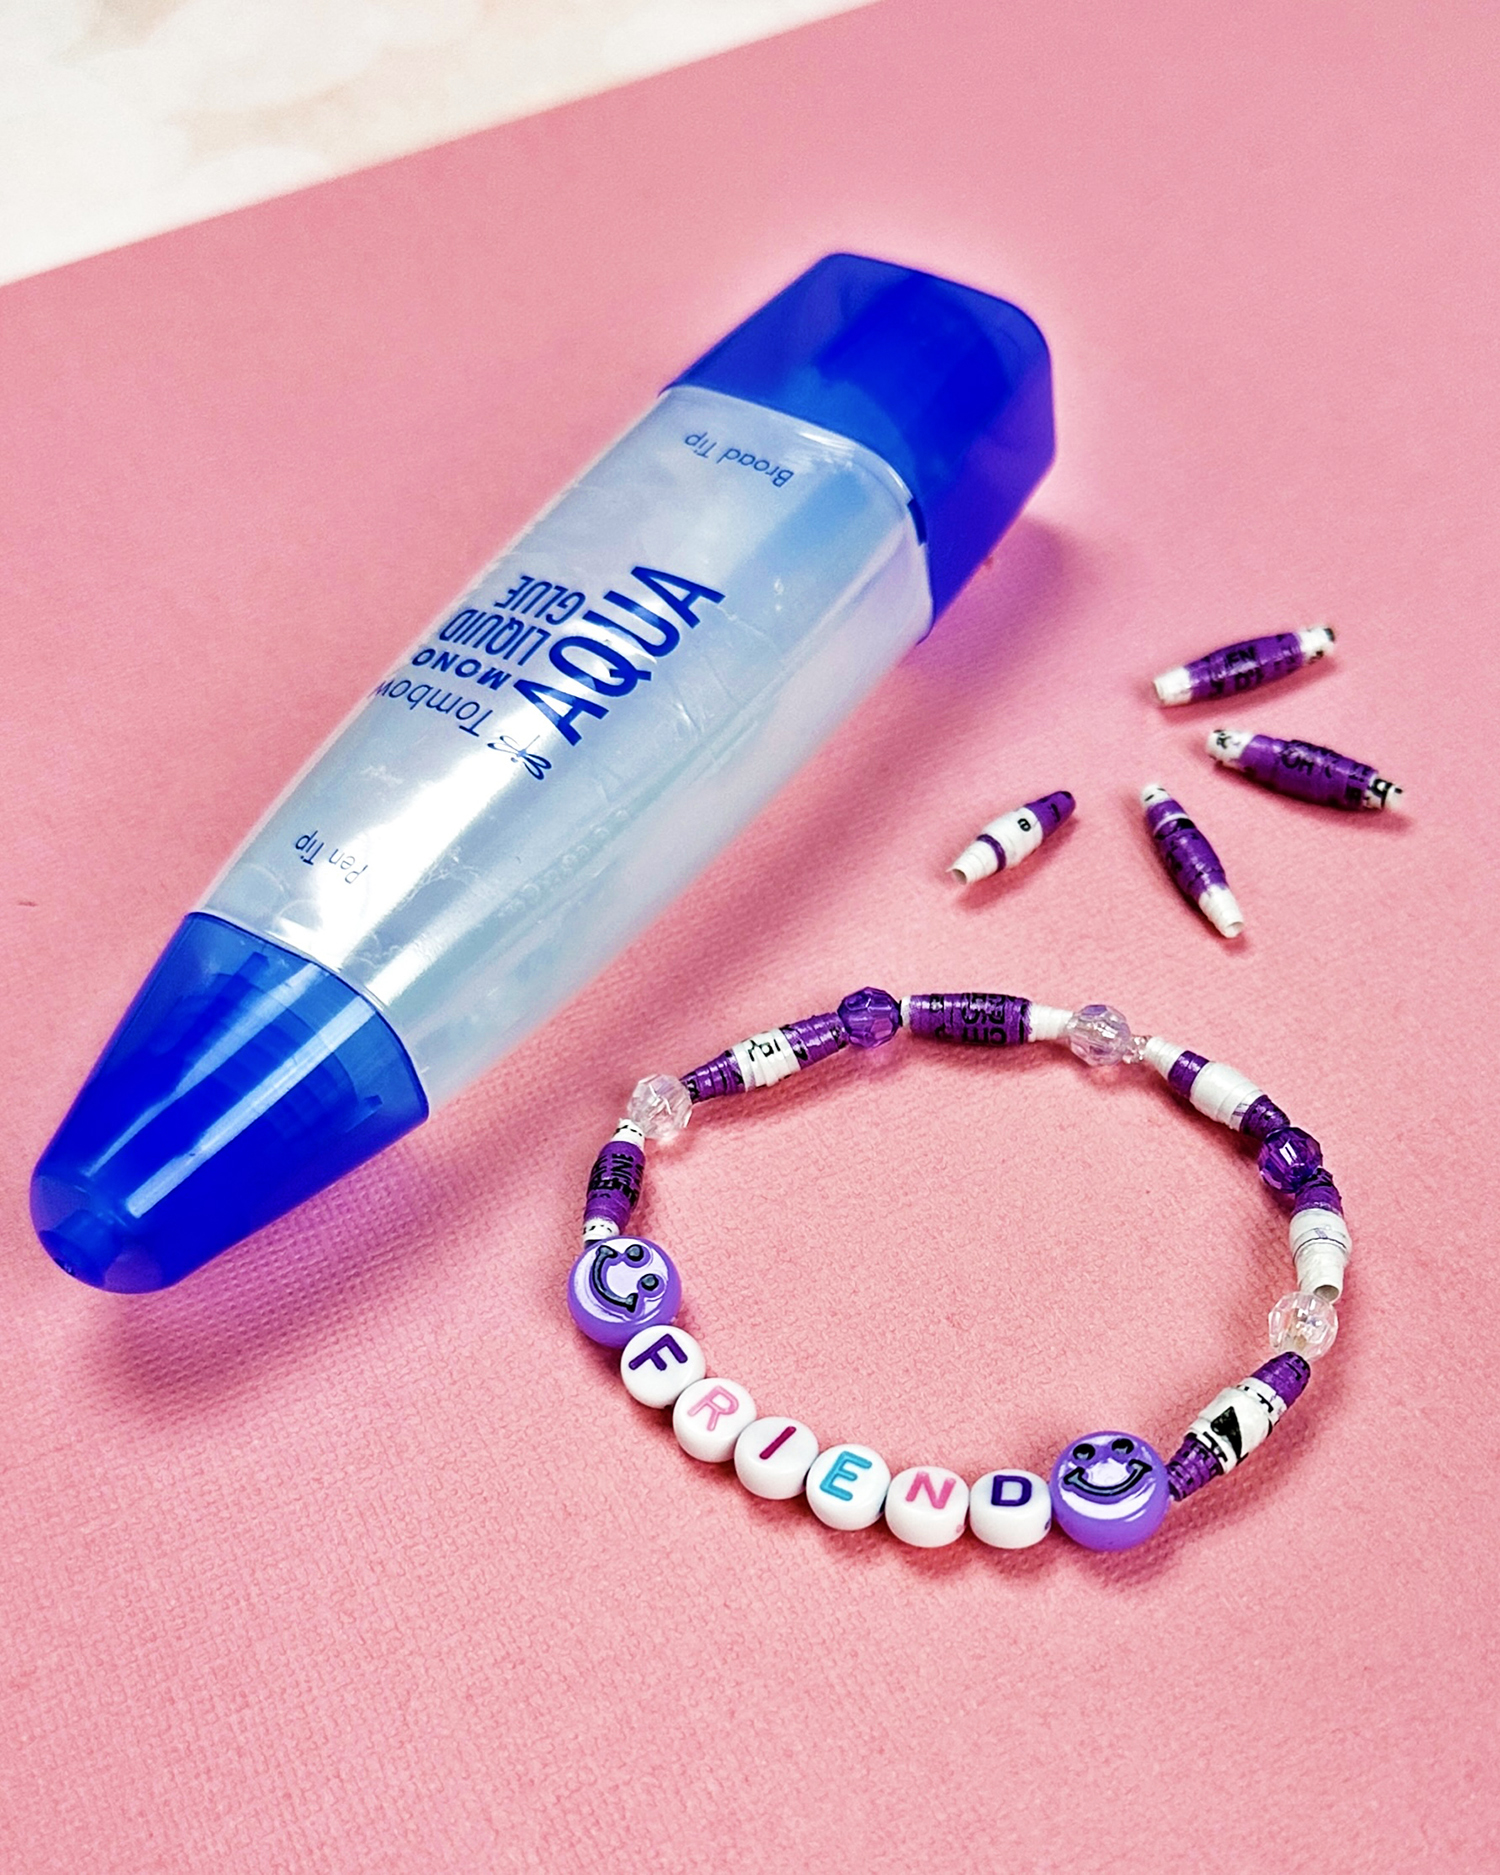 Use tea bags and Tombow Adhesives to make a recycled bracelet for Galentine's Day! #tombow #diy